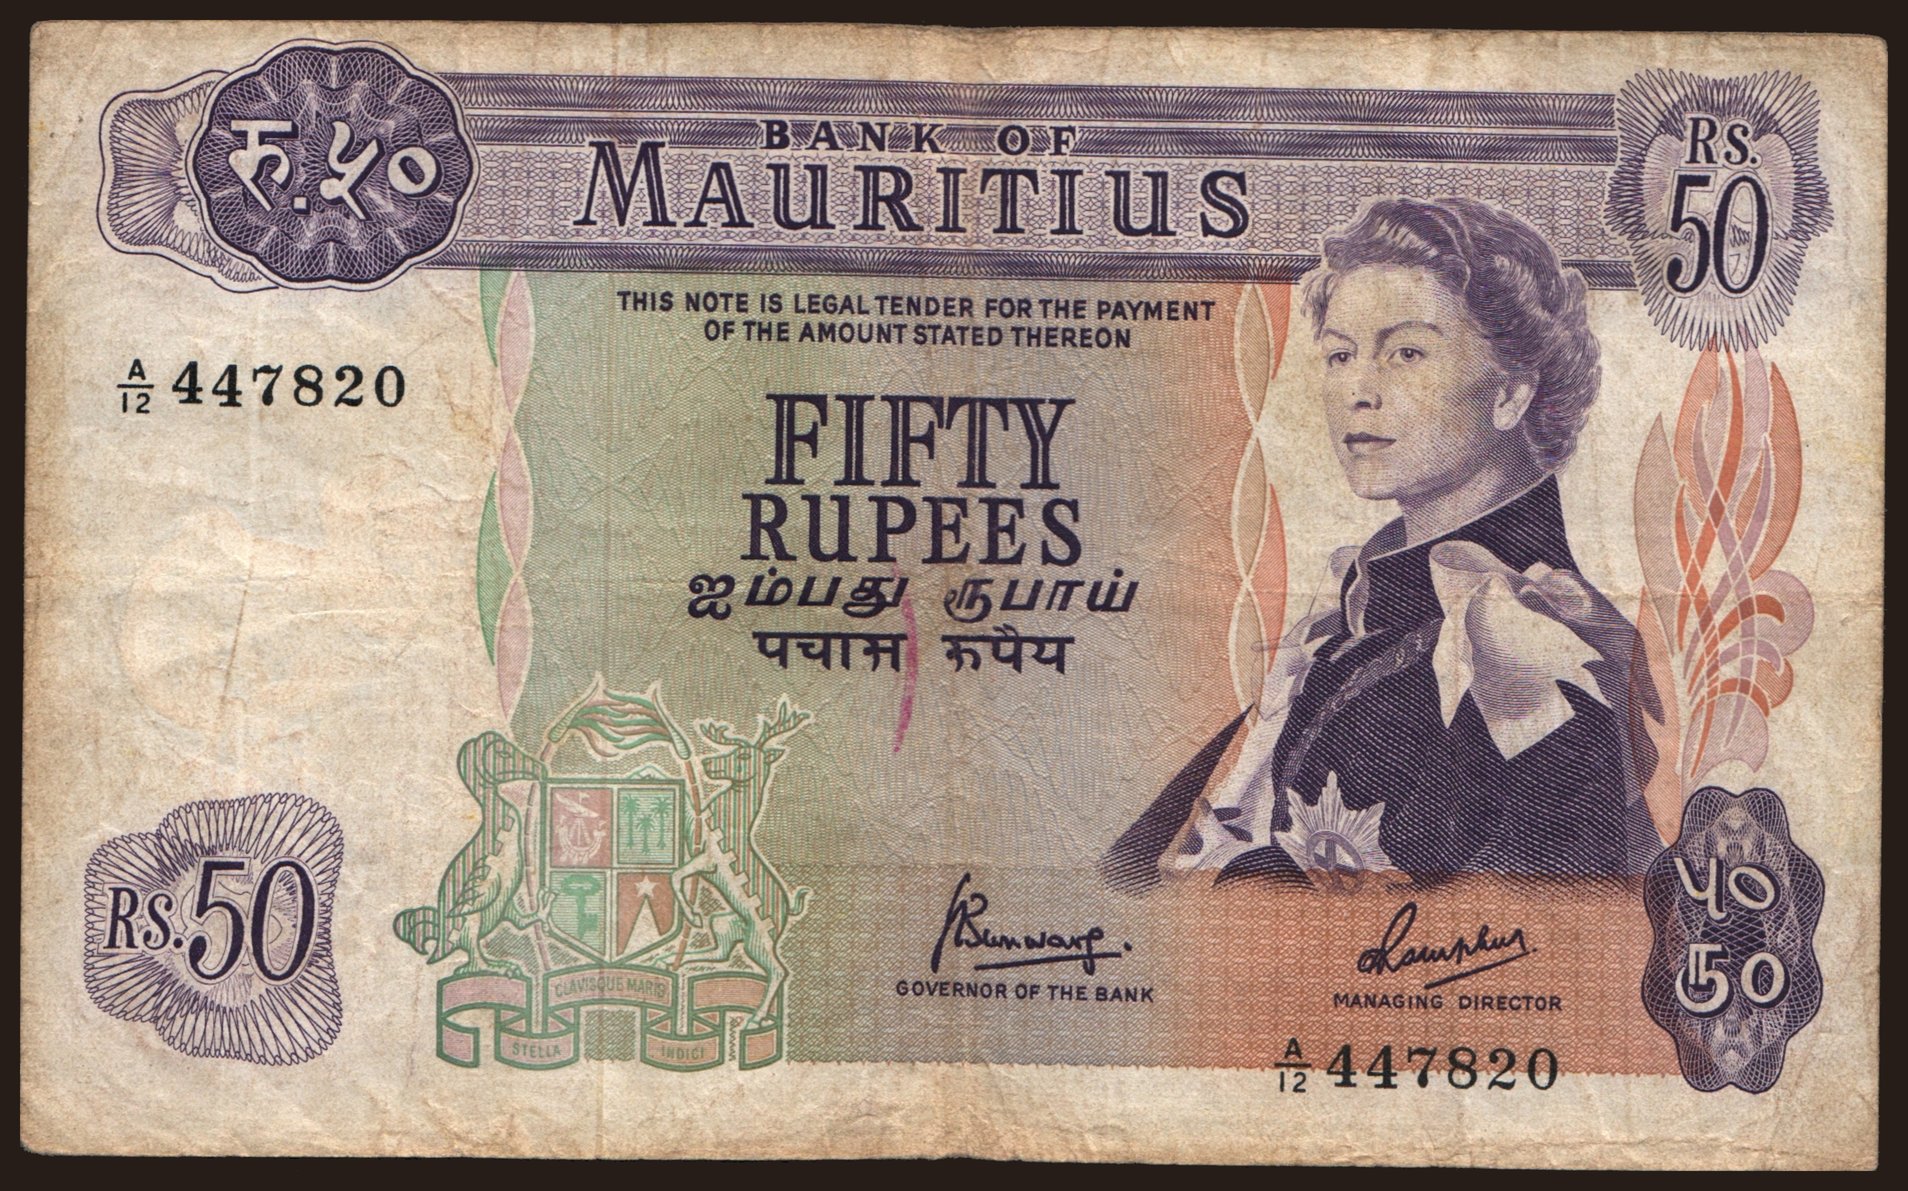 50 rupees, 1967